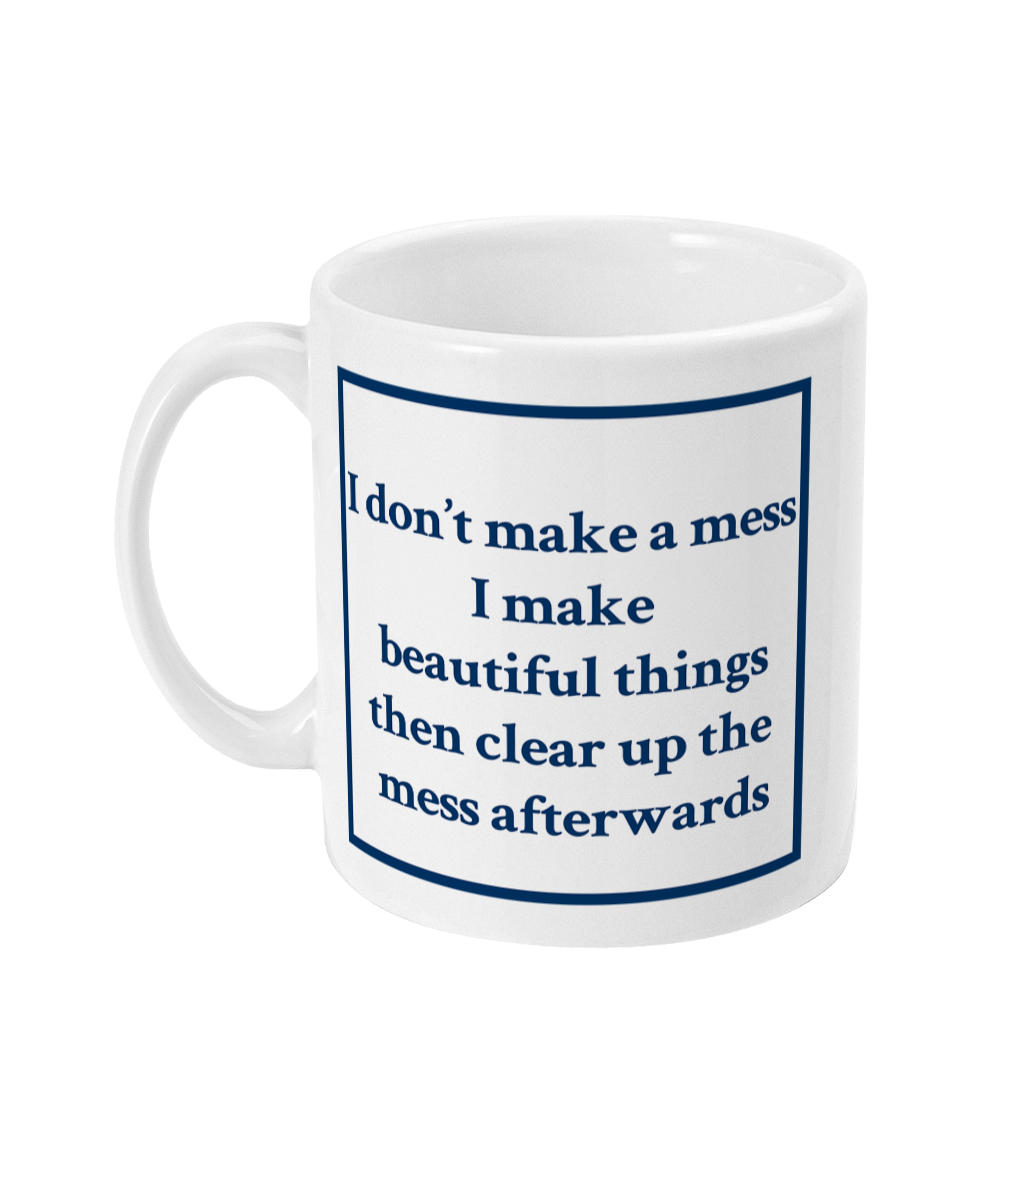 mug with I don't make mess I make beautiful things then clear up the mess afterwards printed on it